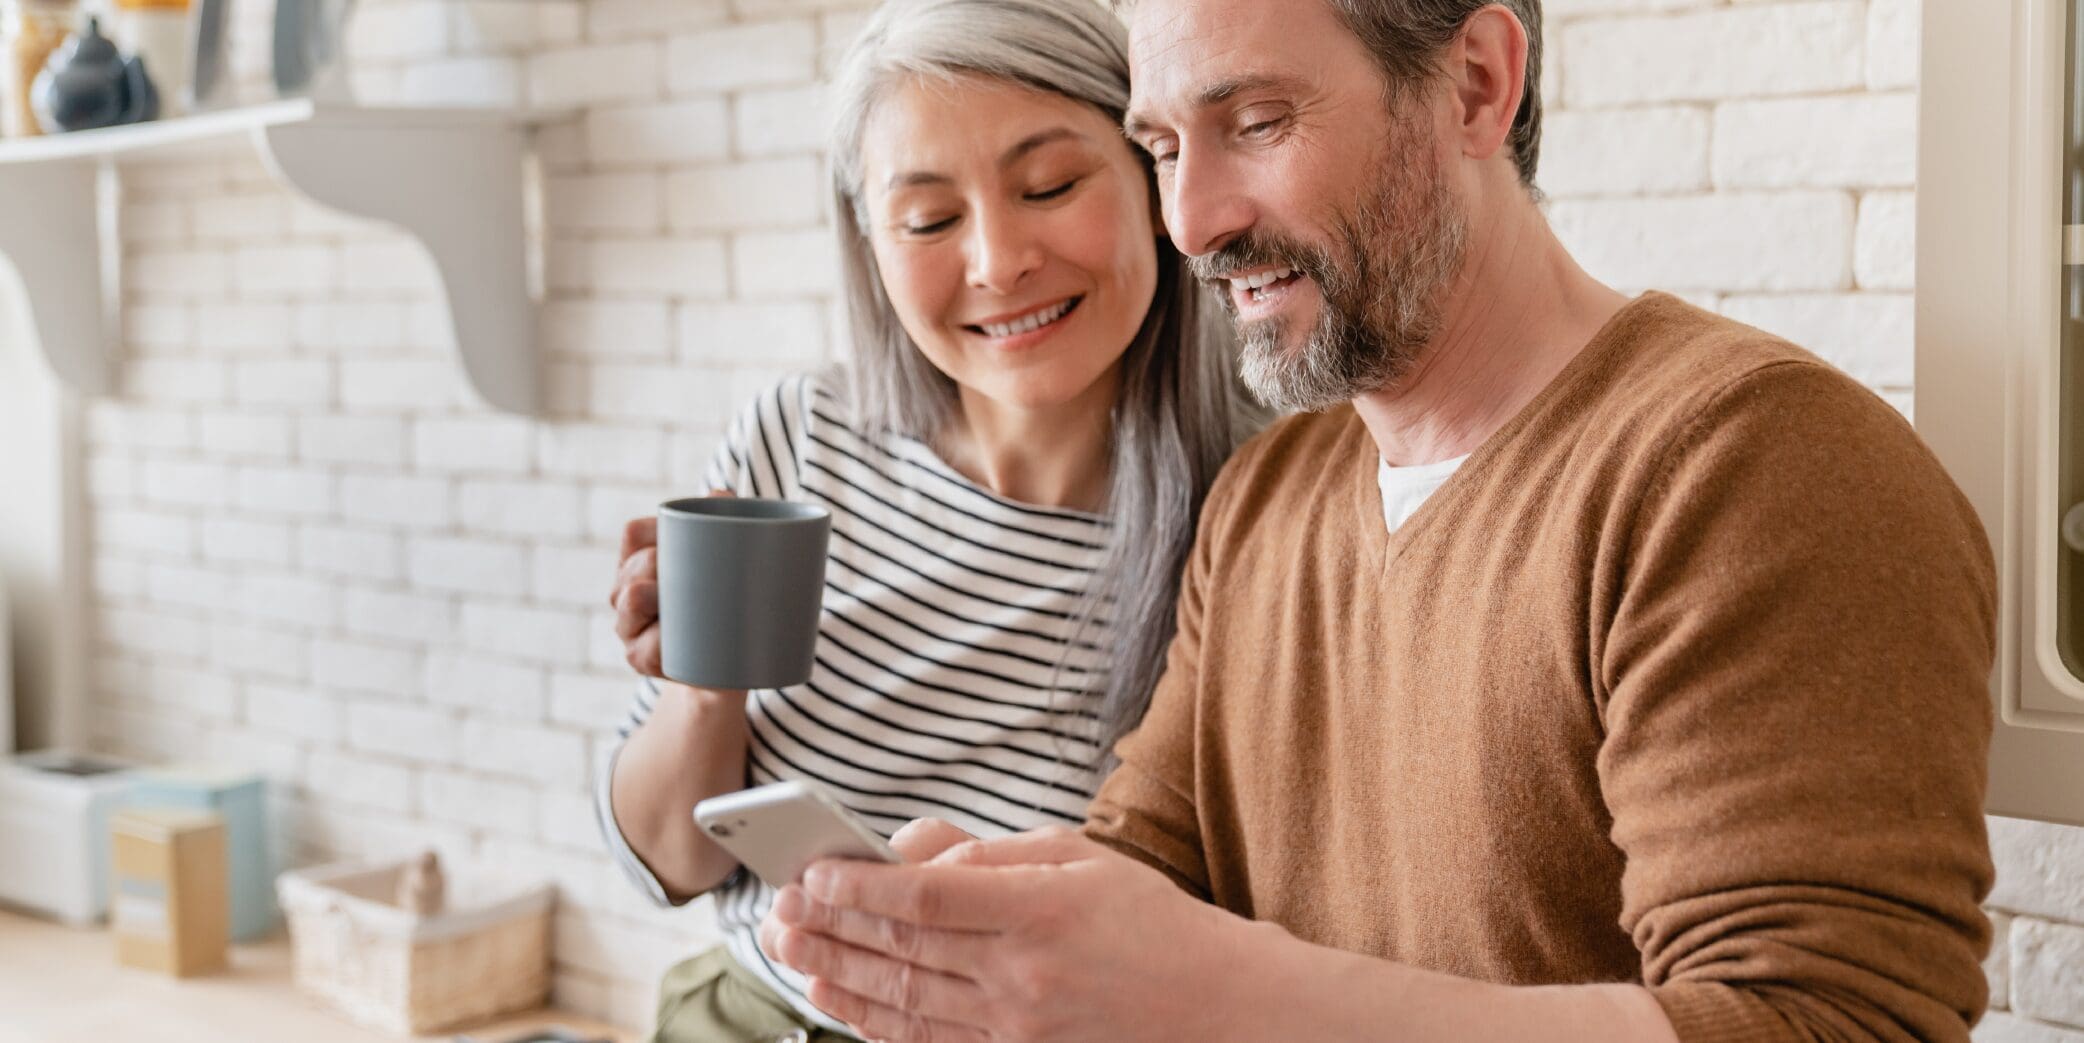 woman holding a mug while looking at man's cellphone screen